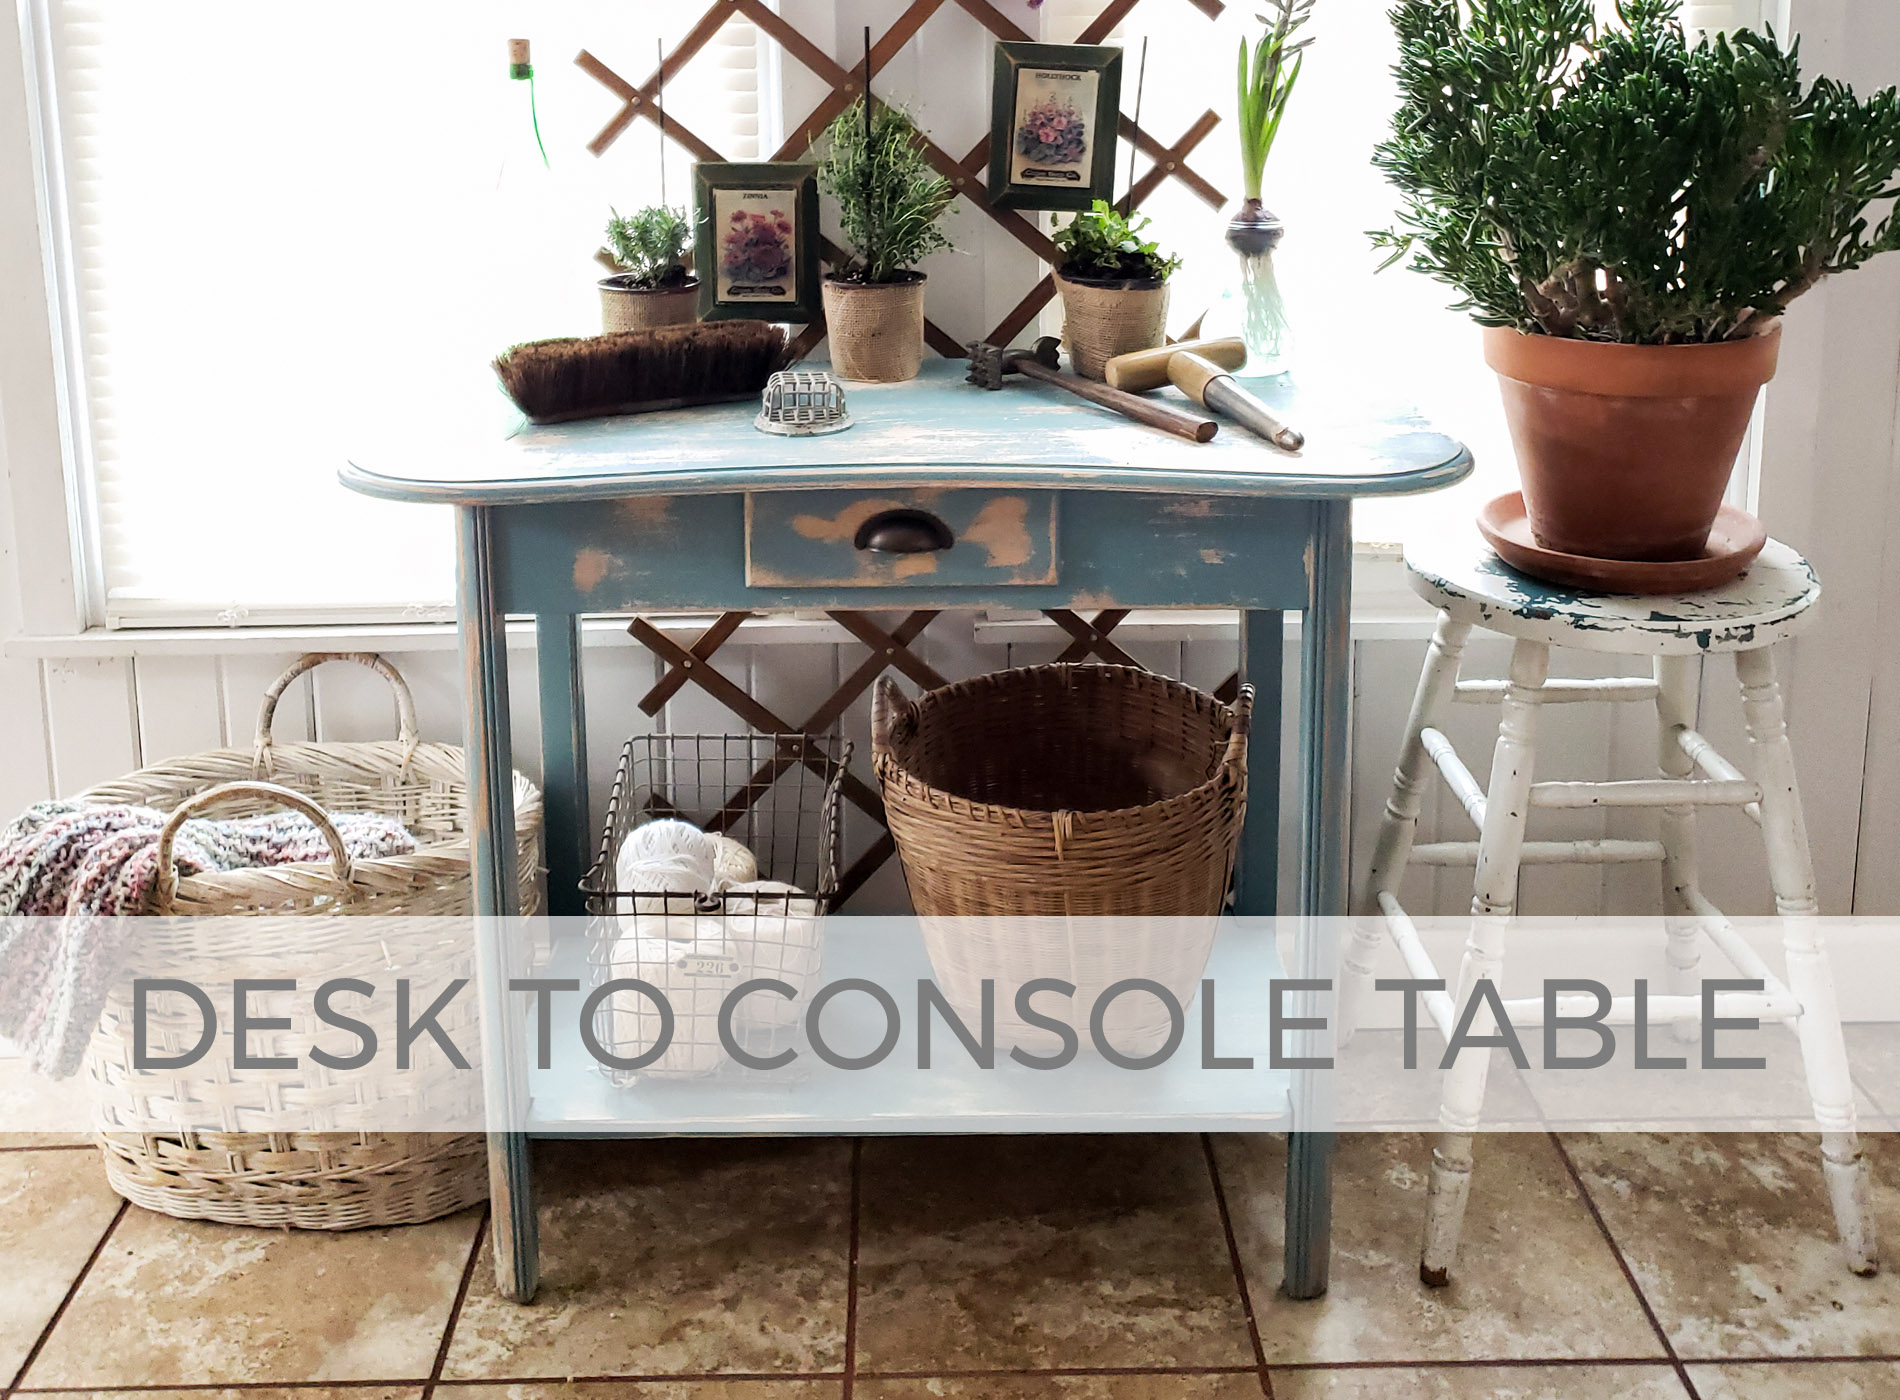 Upcycled Desk to Console Table by Larissa of Prodigal Pieces | prodigalpieces.com